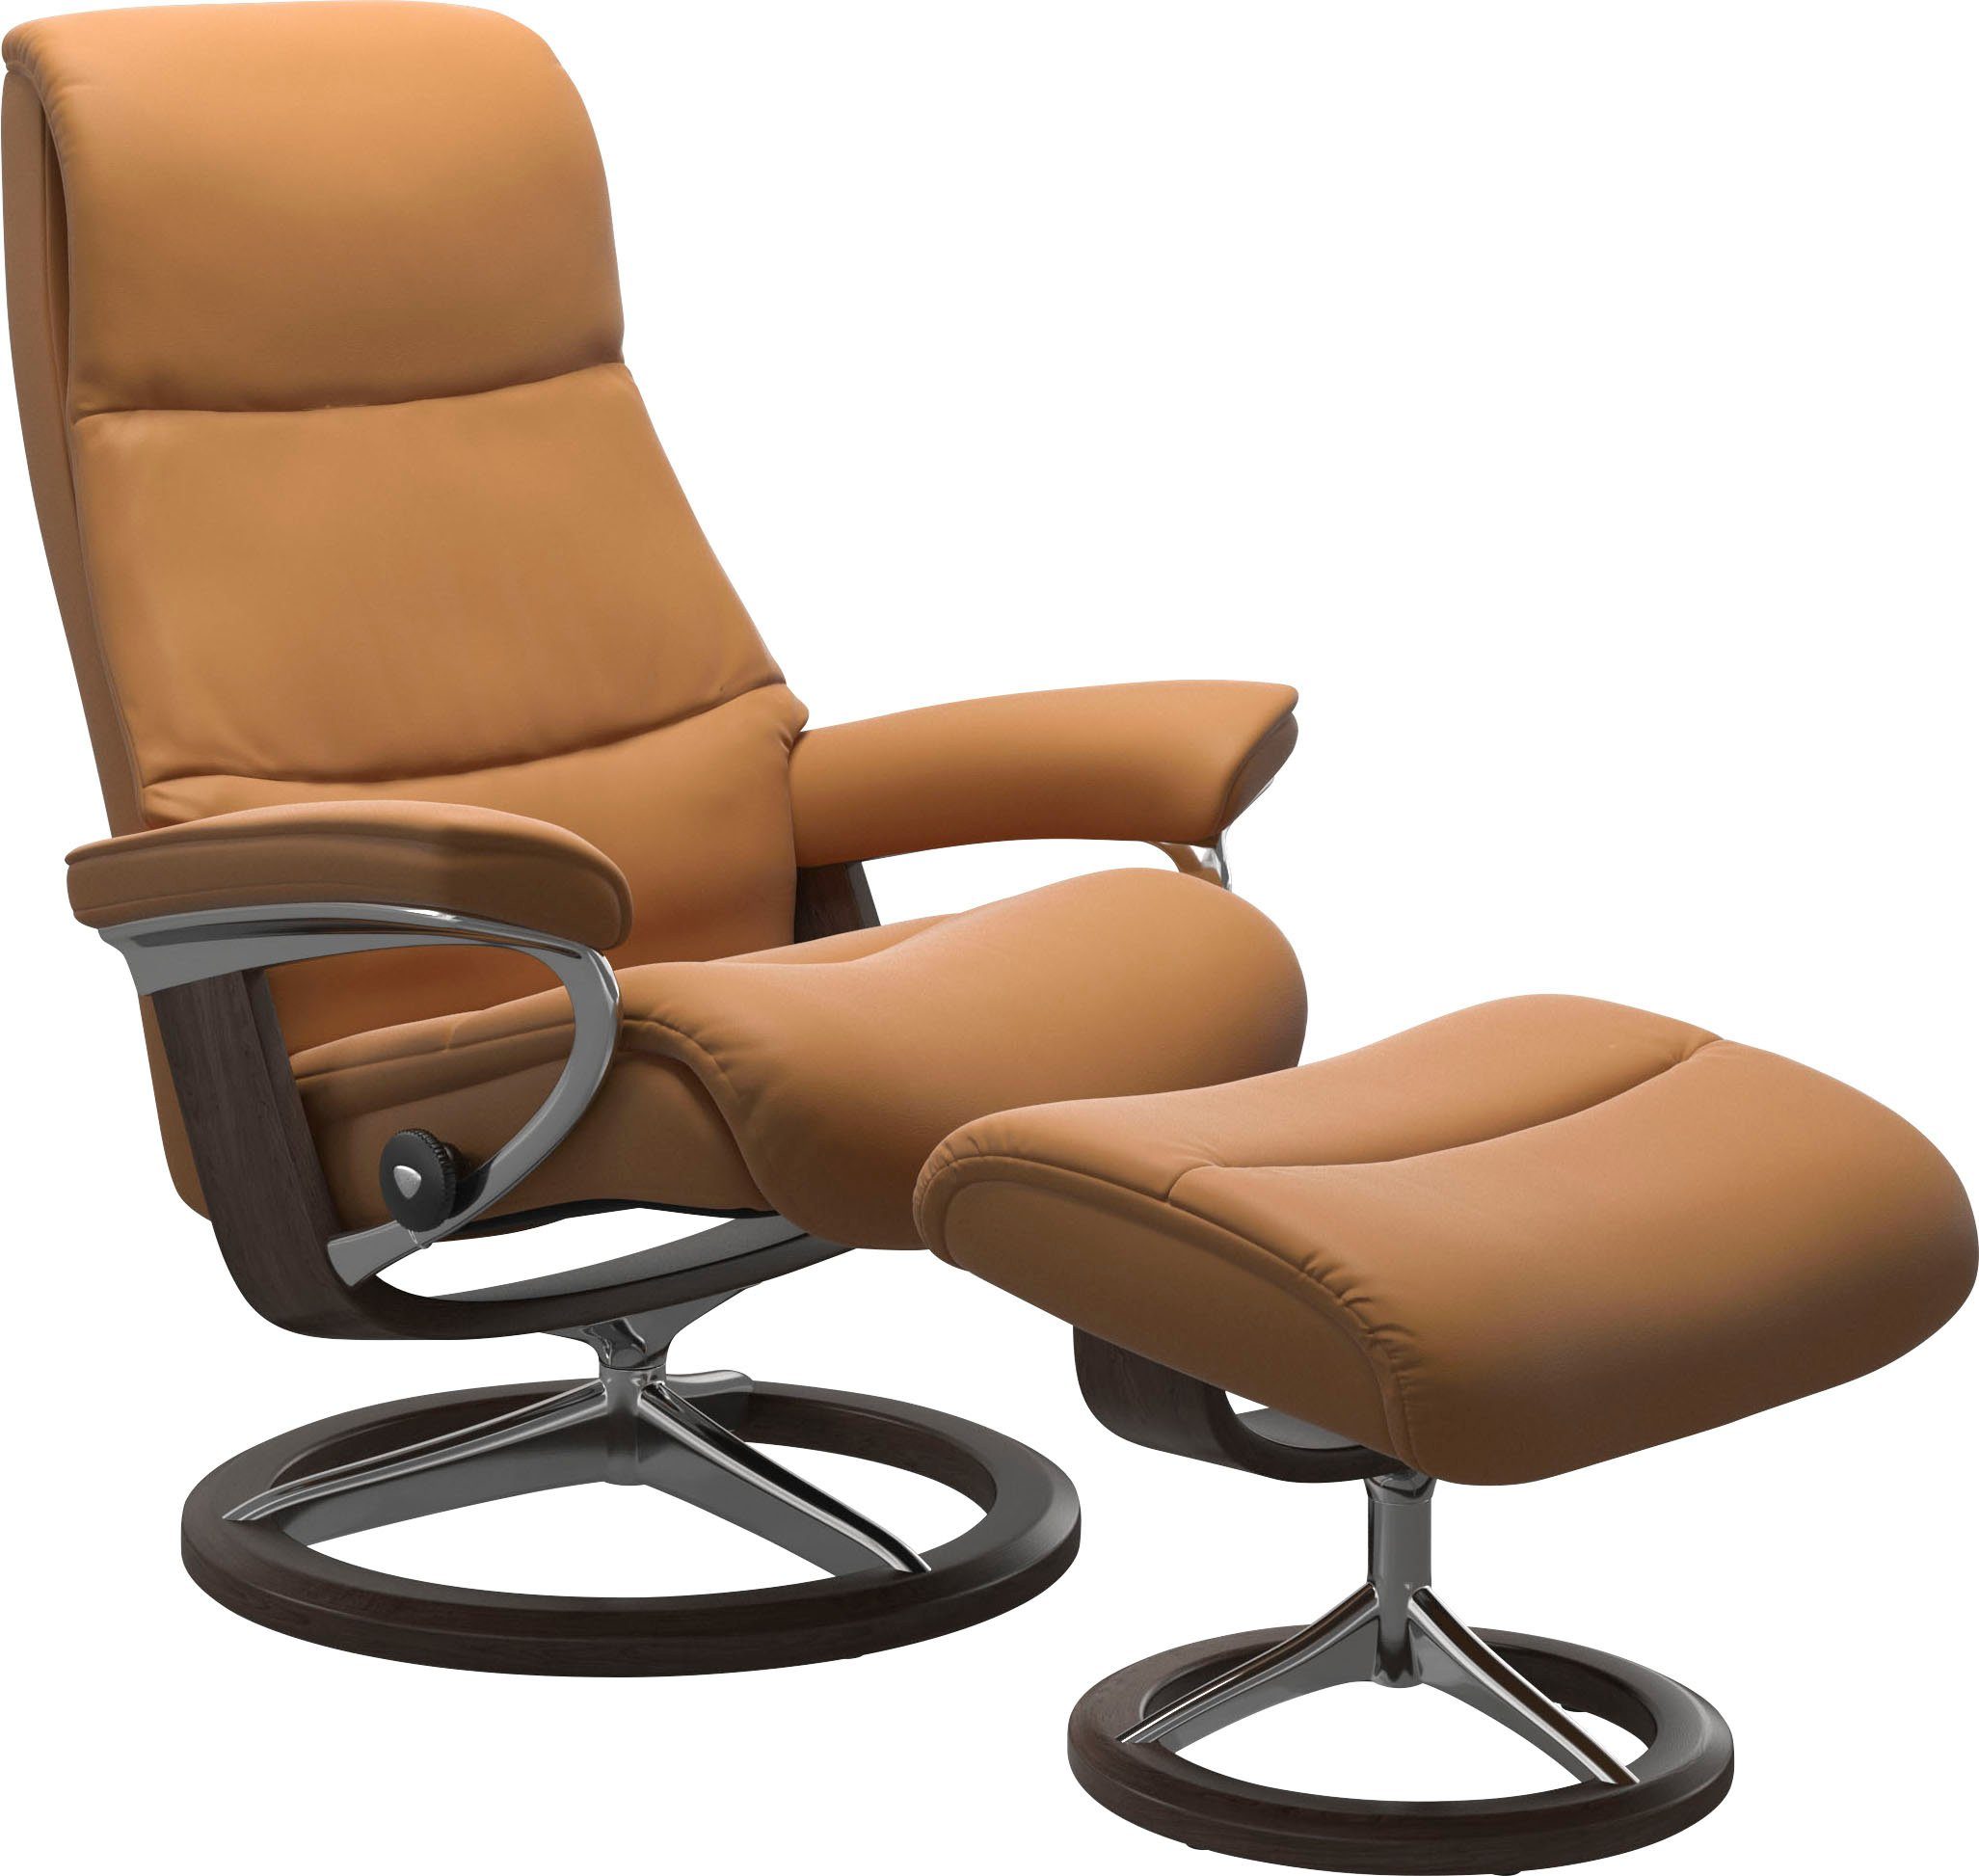 Stressless® Relaxsessel Größe mit S,Gestell Base, Wenge View, Signature